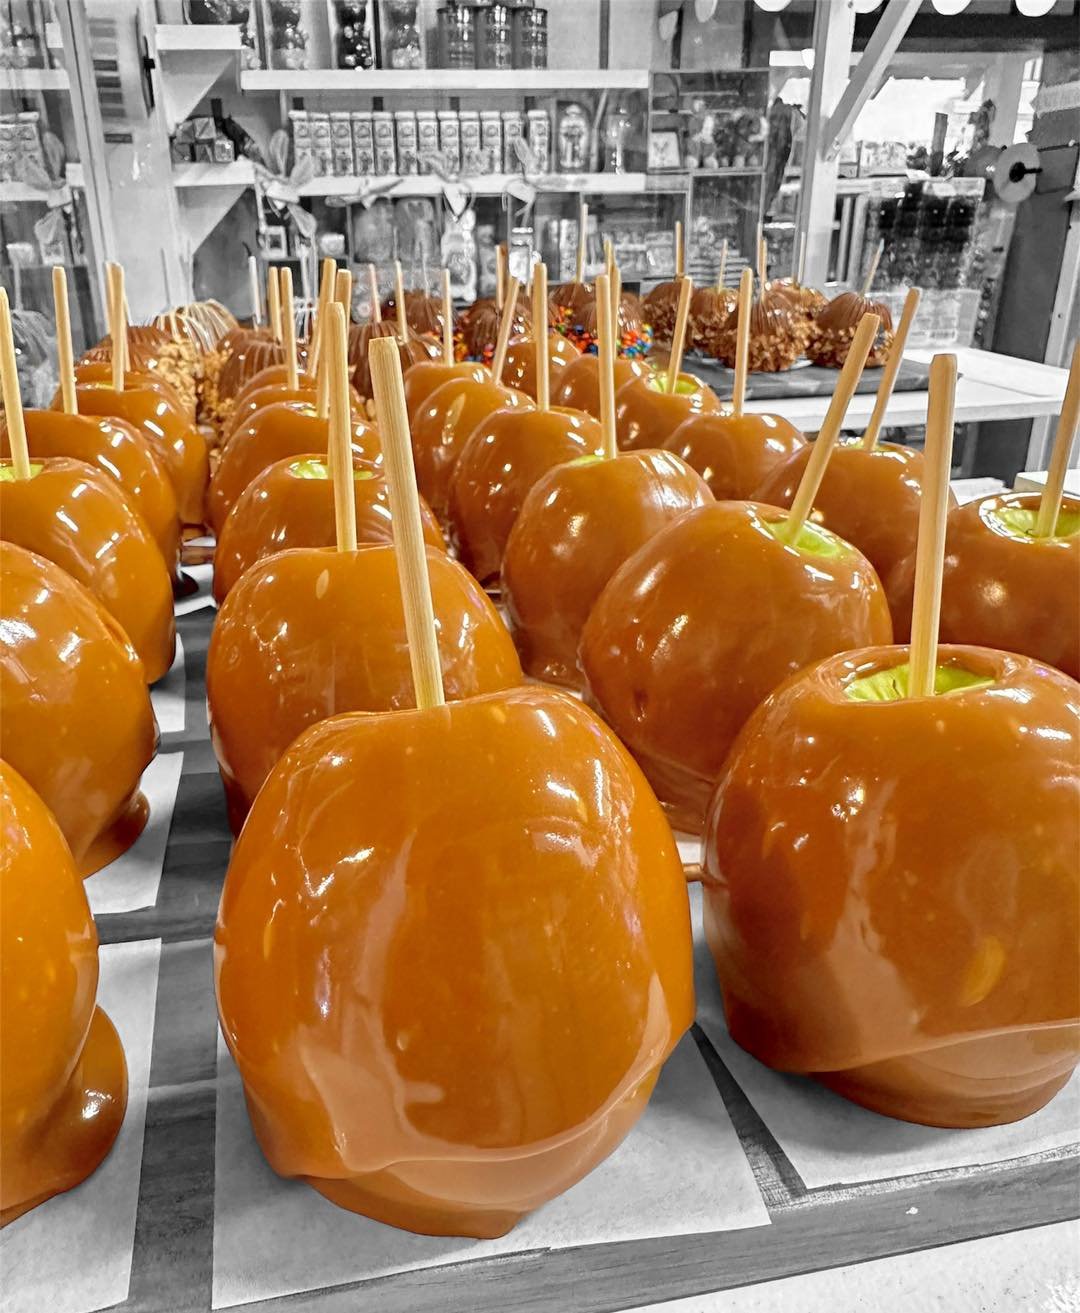 Favorite topping on your caramel apple aaannd go! 
.
.
.
#sweettooth #dessert #sweet #snacks #sweettreats #candyshop #candy #candystore #ssi #stsimonsisland #stsimons #handmade #homemade #caramelapples